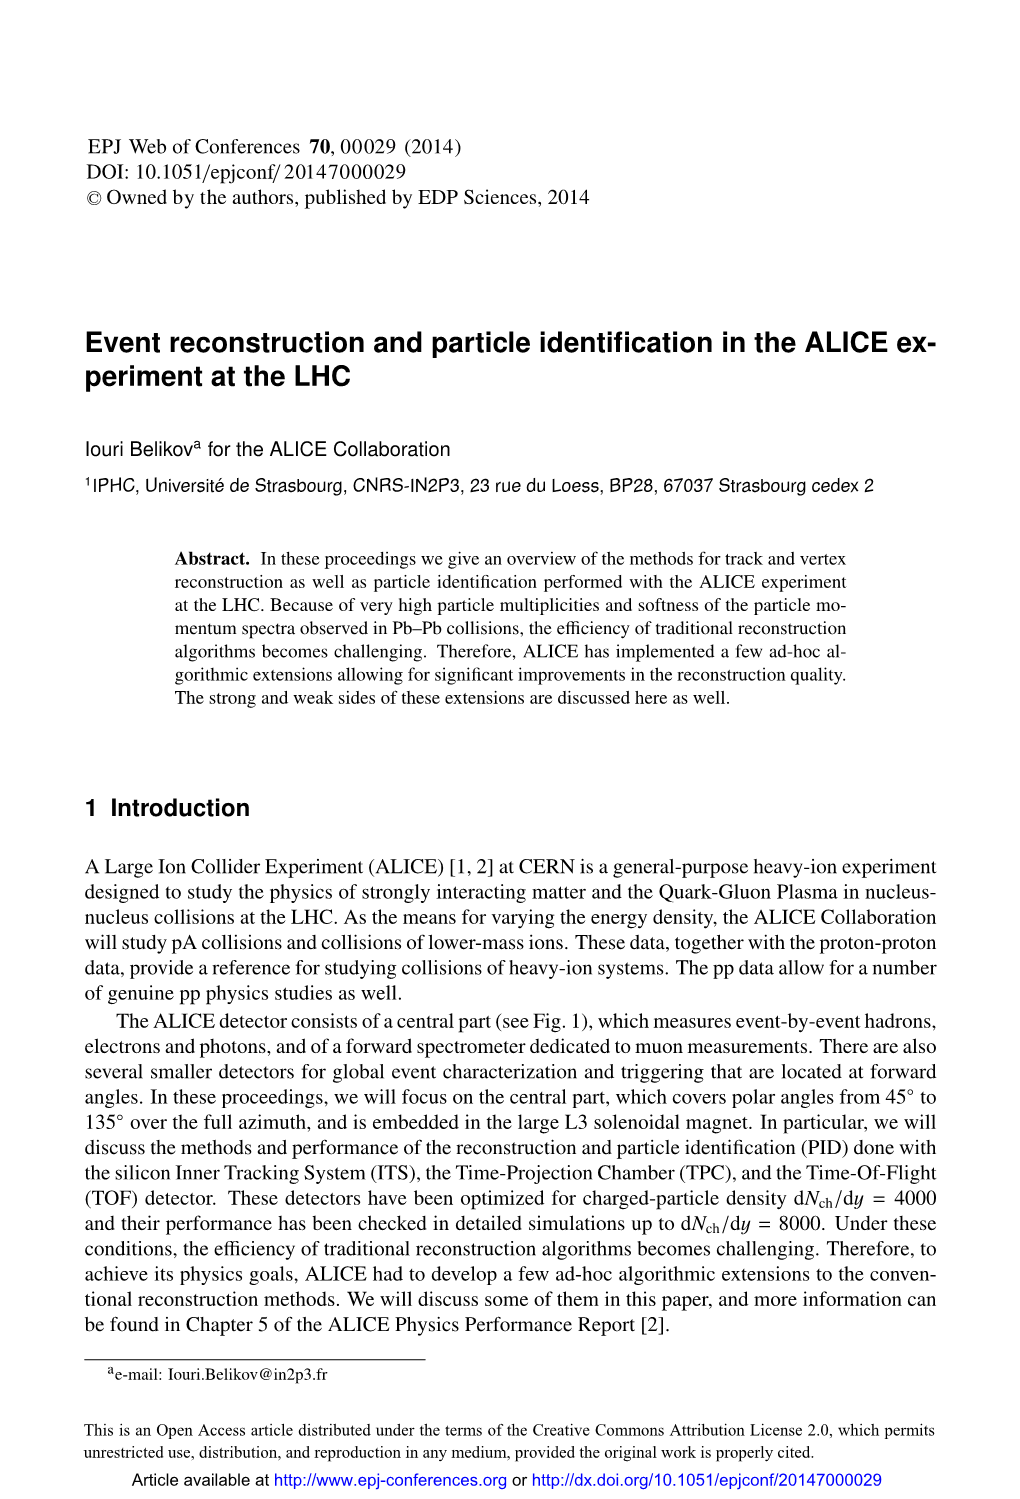 Event Reconstruction and Particle Identification in the ALICE Experiment at The